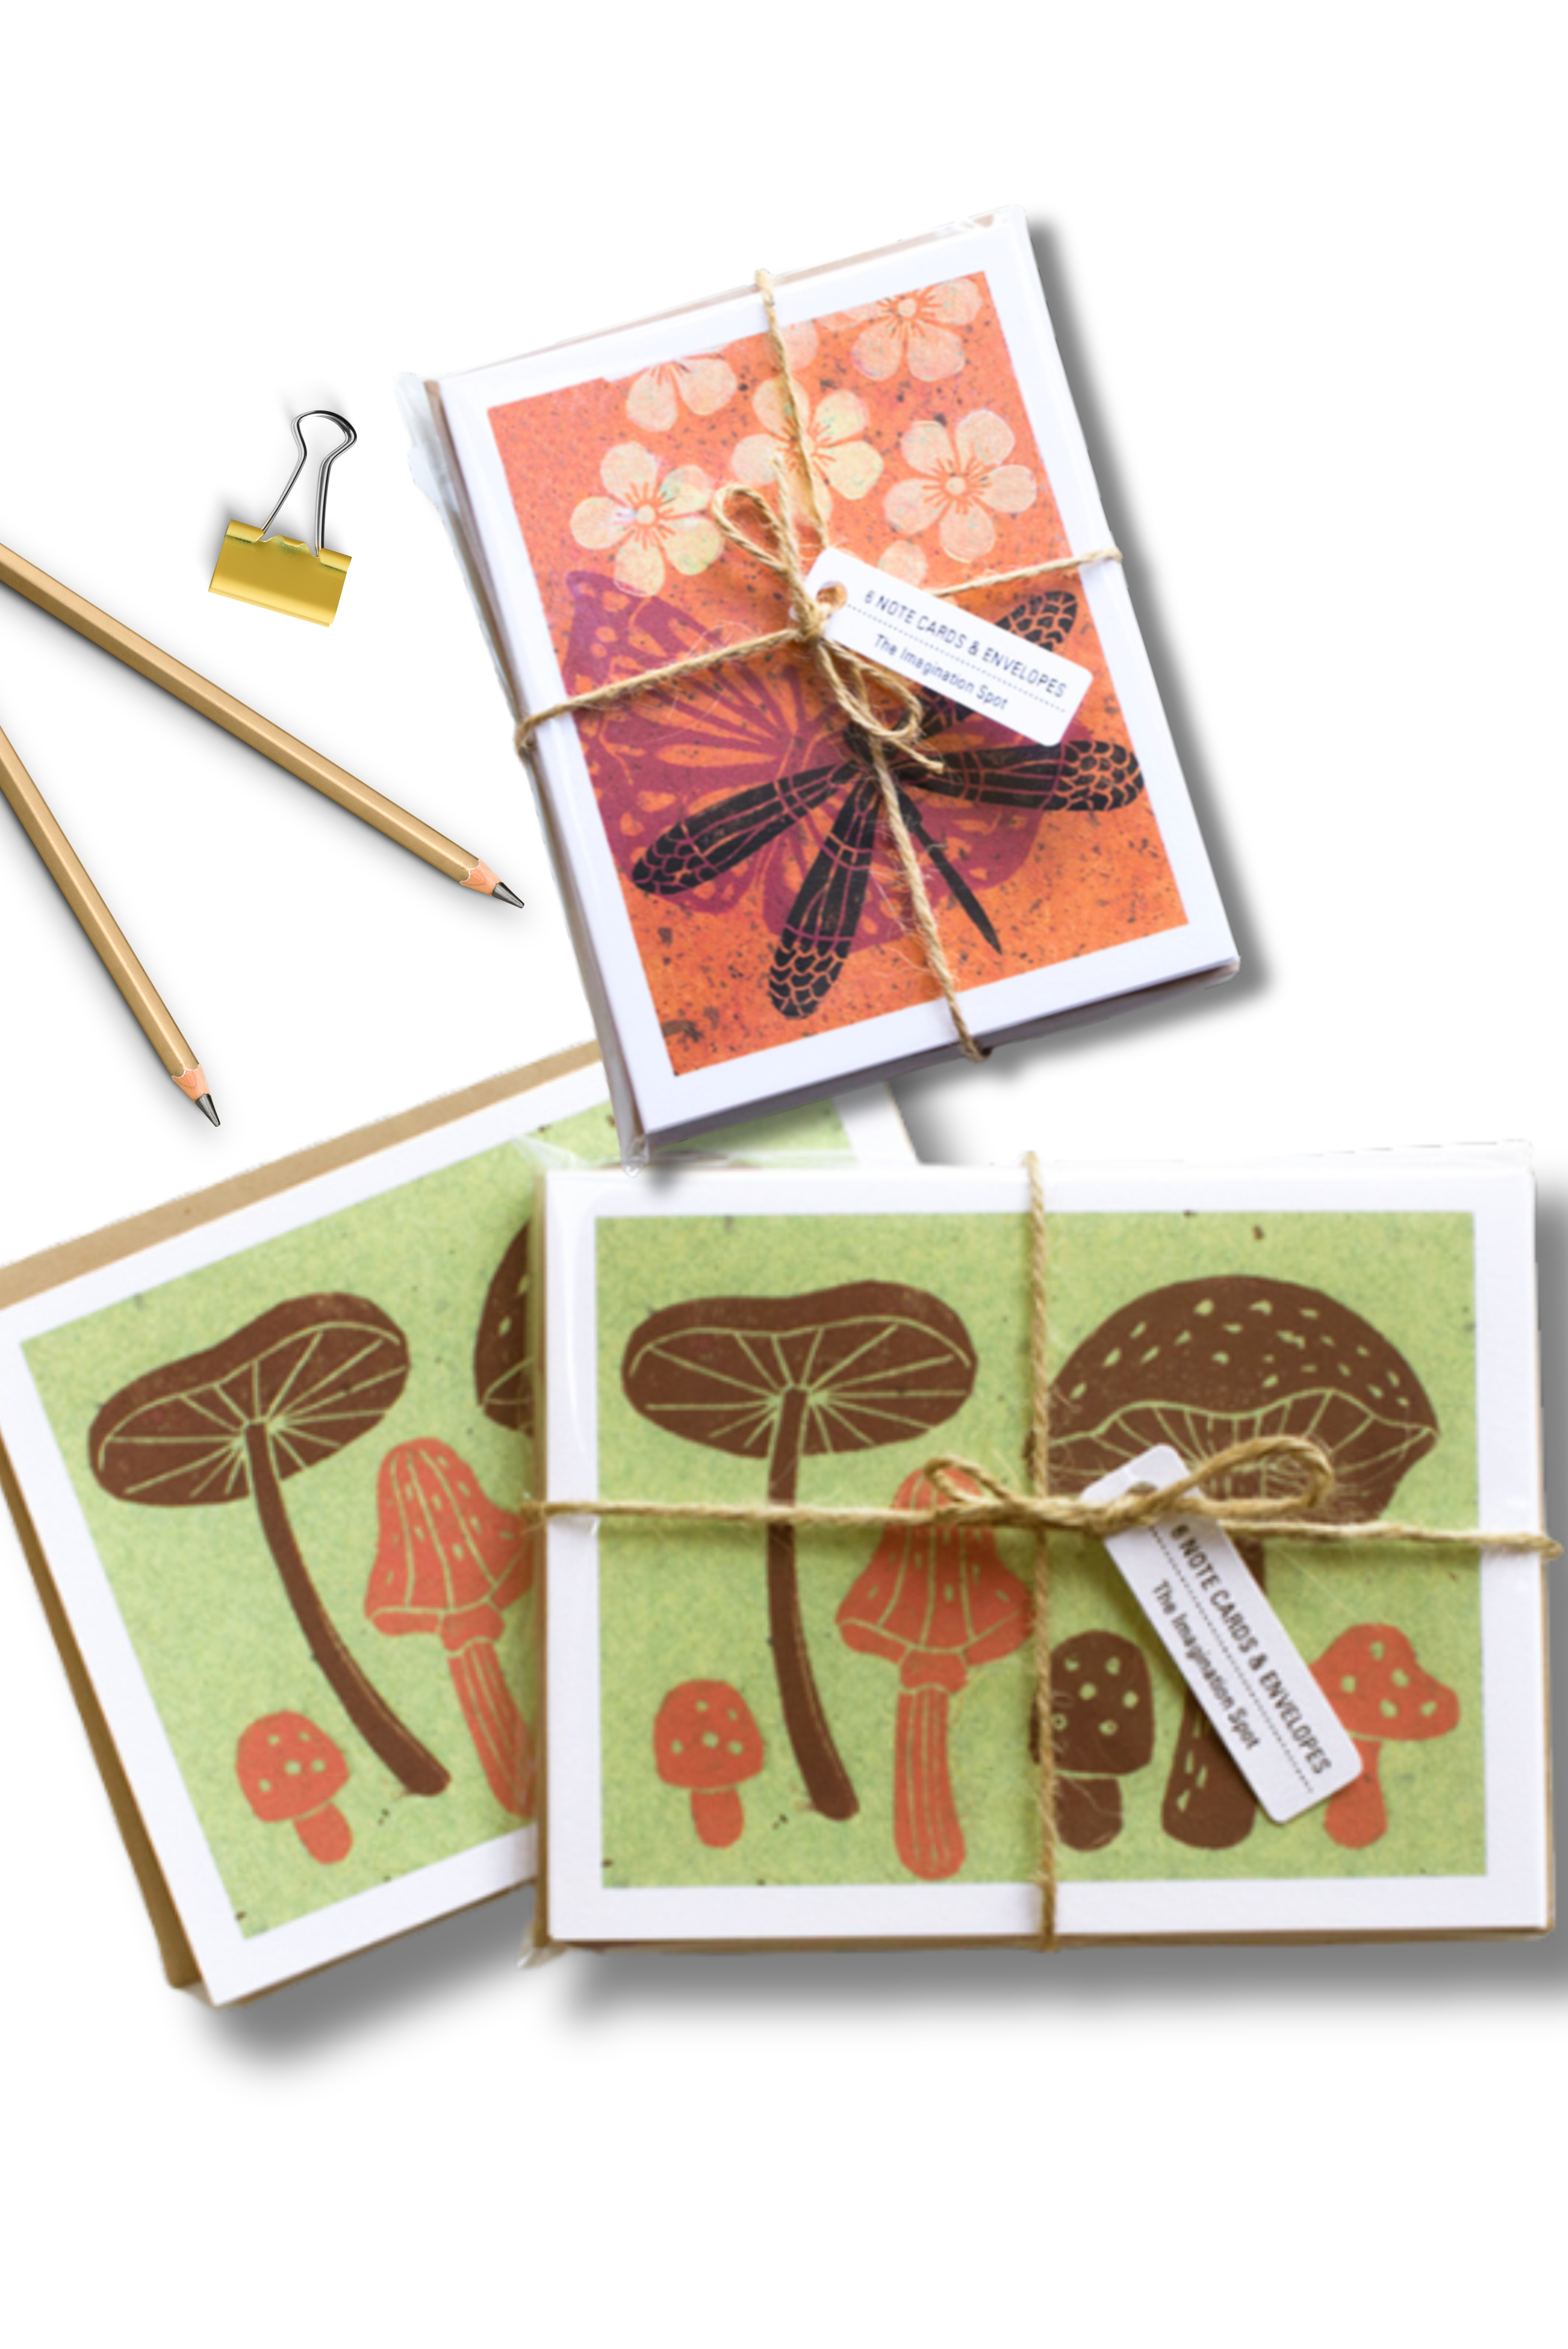 Blank note card sets - The Imagination Spot - cards and stationery